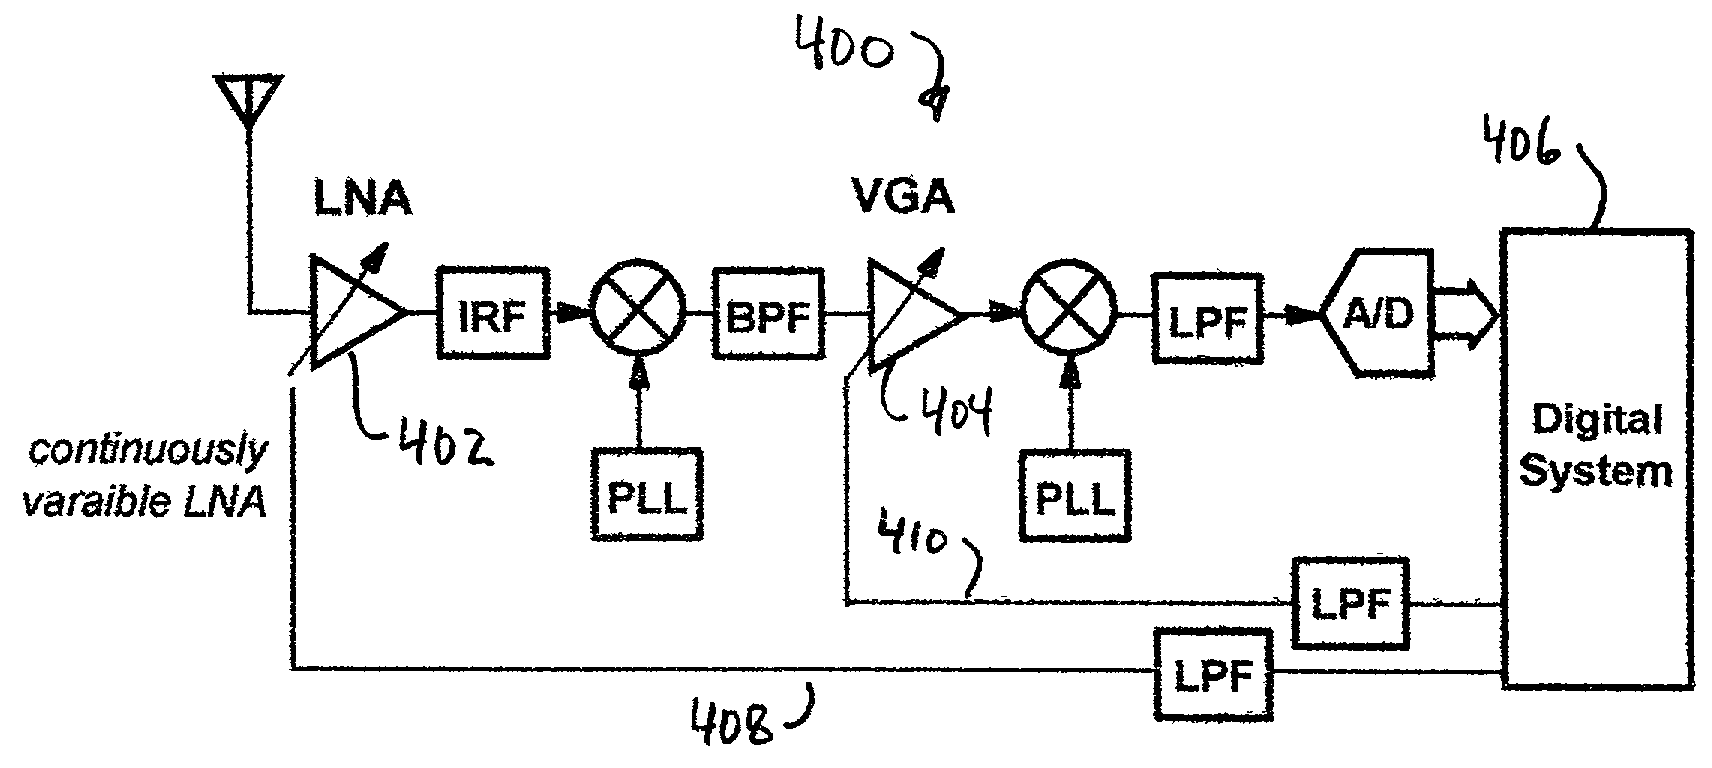 Variable-gain low noise amplifier to reduce linearity requirements on a radio receiver